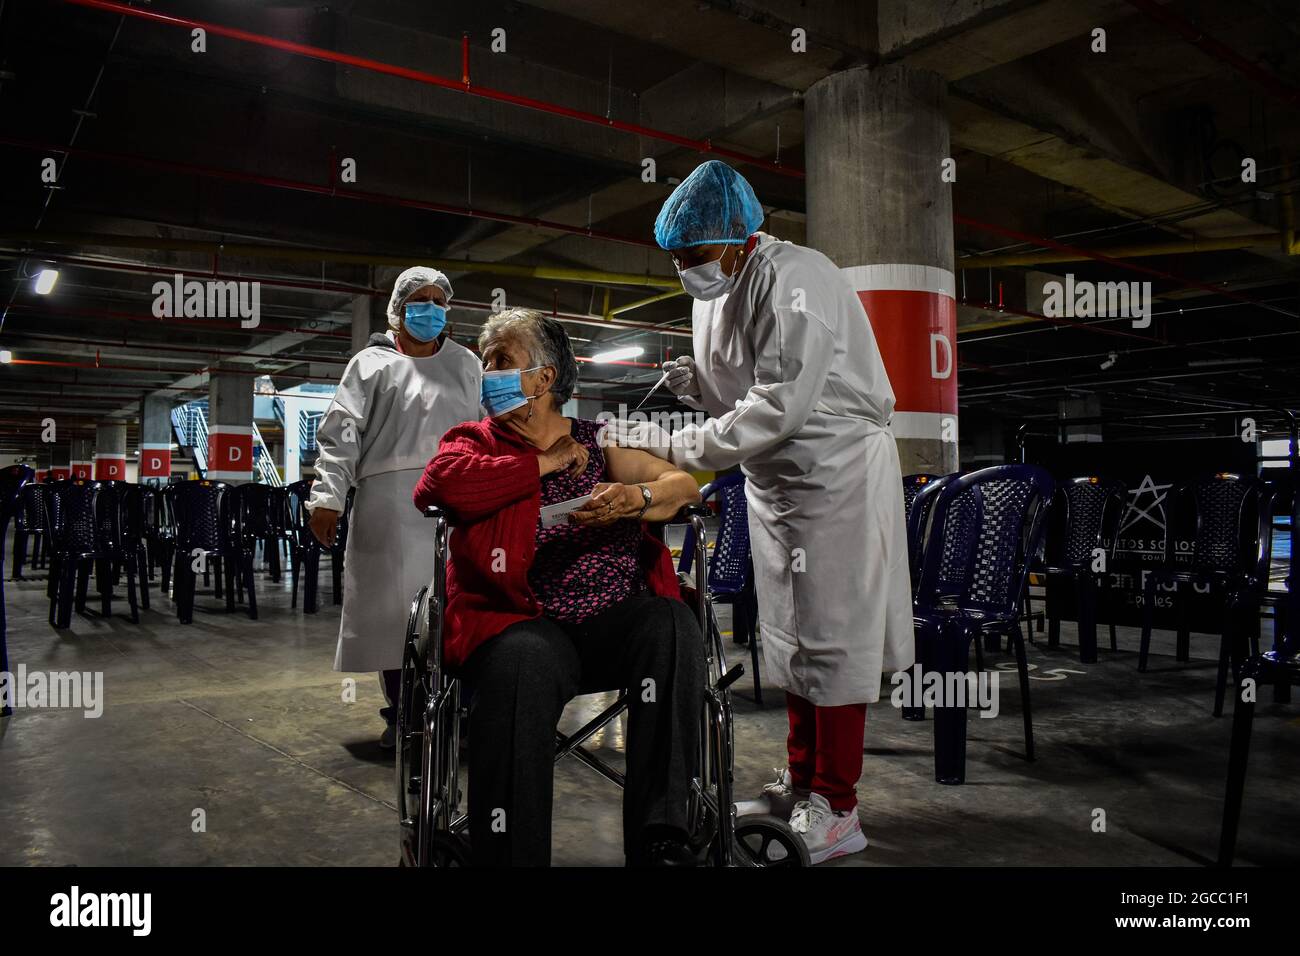 A woman in a wheelchair gets a dose of the Moderna COVID-19 as people from ages 25 to 30 start their vaccination phase with the Moderna novel COVID-19 vaccine against the Coronavirus disease in Ipiales - Nariño, Colombia on August 2, 2021. Stock Photo